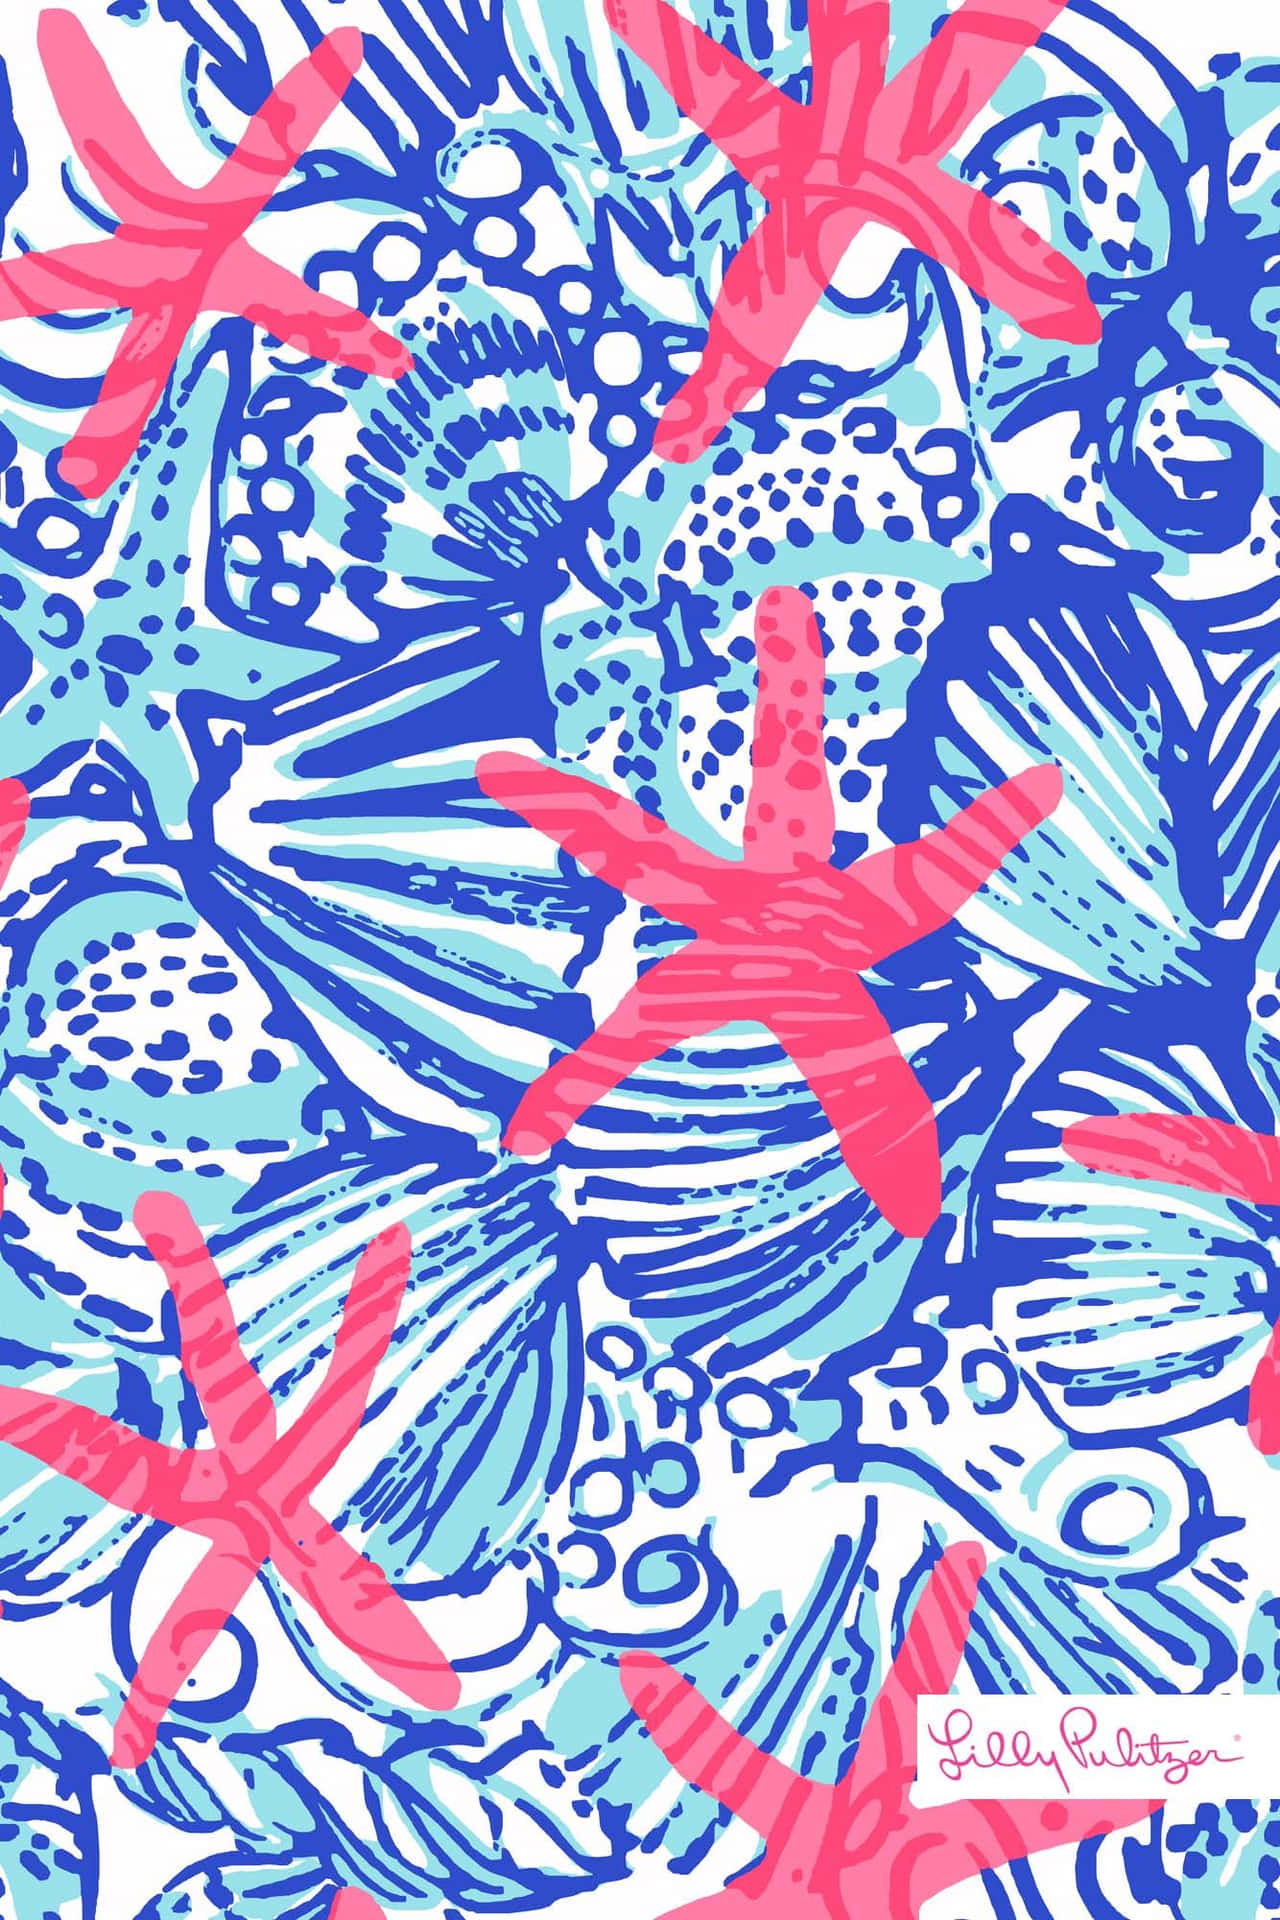 Download Colorful Lilly Pulitzer-inspired Background | Wallpapers.com